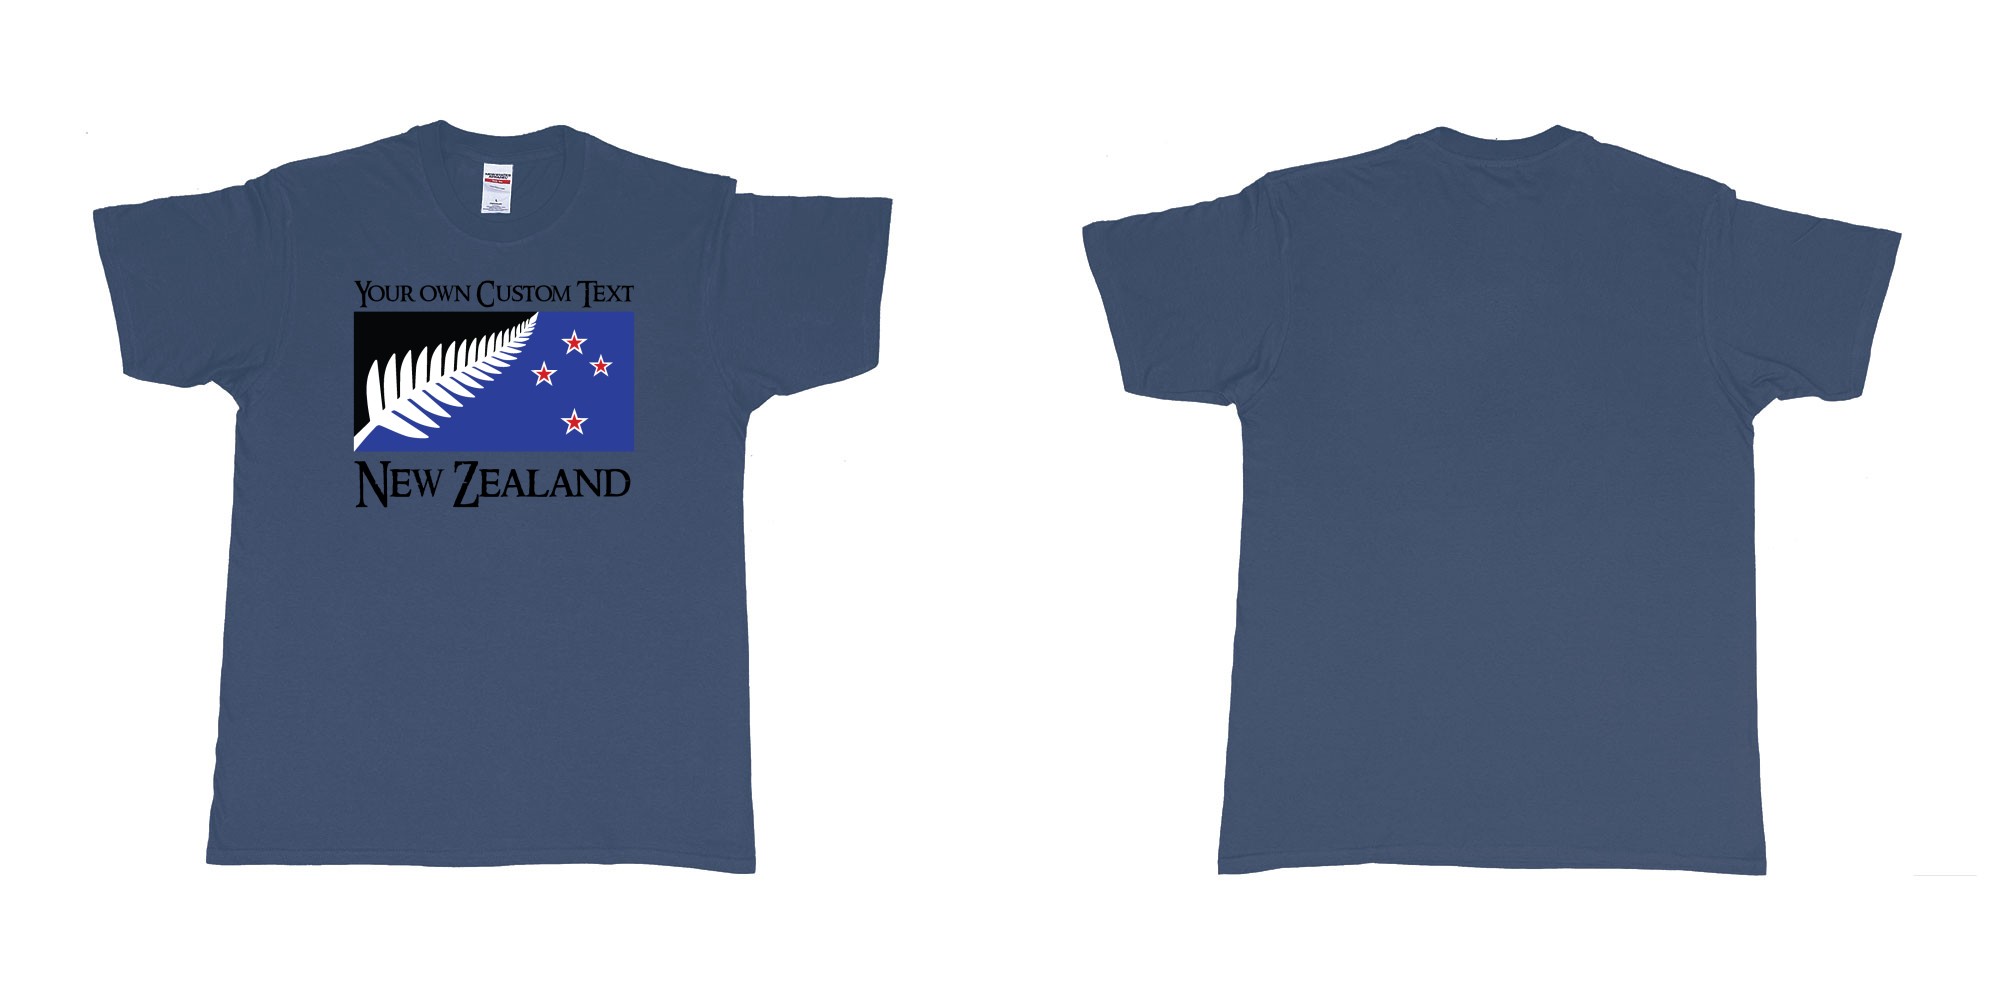 Custom tshirt design new zealand silver fern flag in fabric color navy choice your own text made in Bali by The Pirate Way